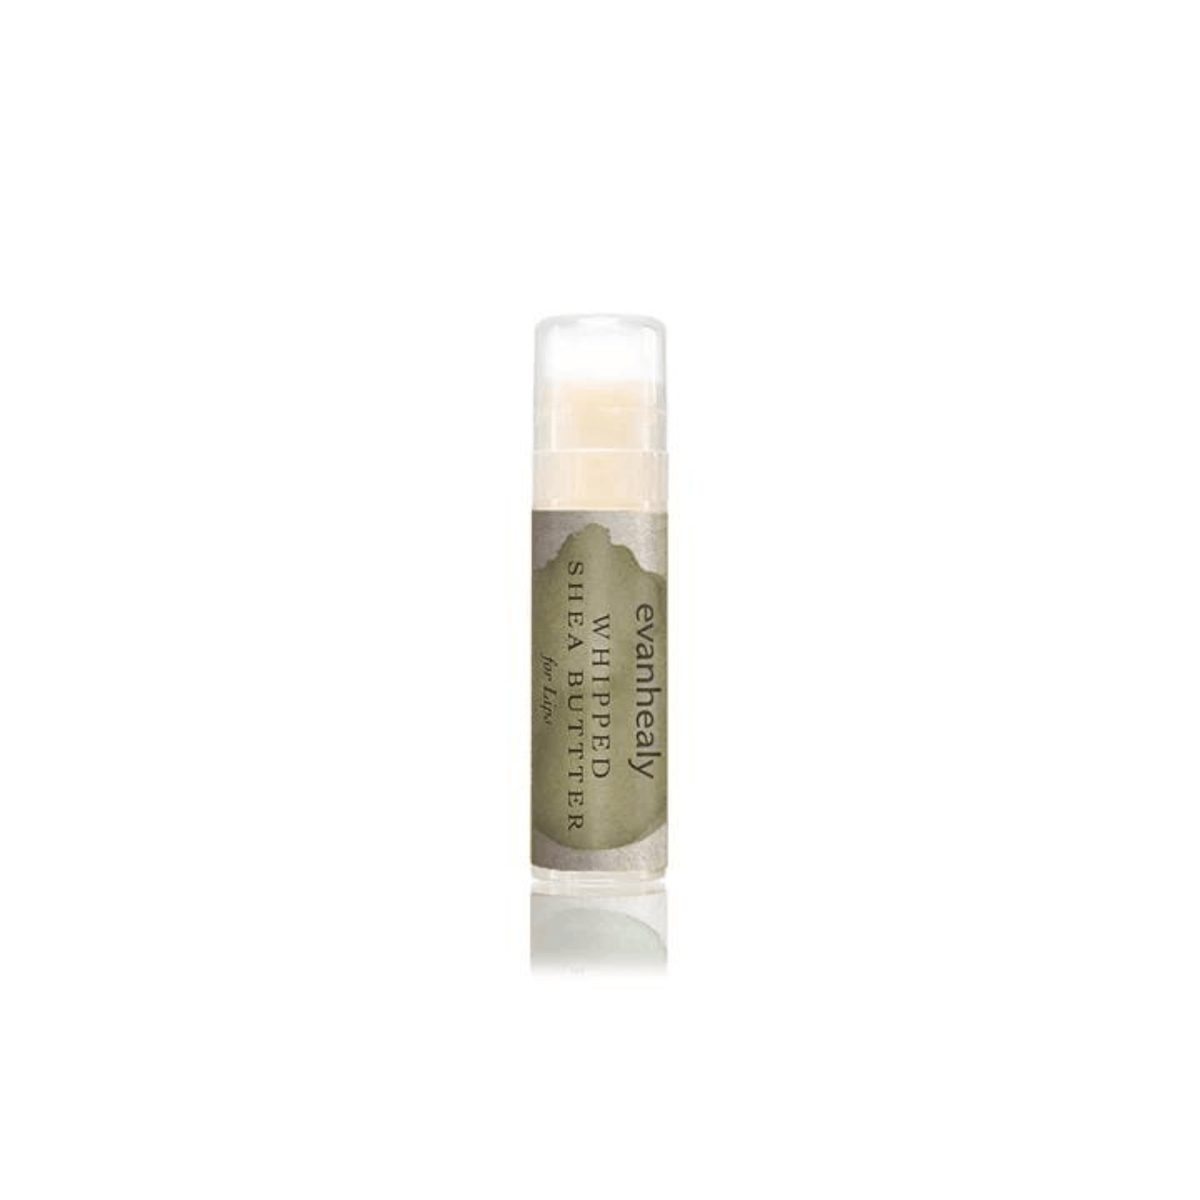 Primary Image of Lip Balm - Whipped Shea Butter